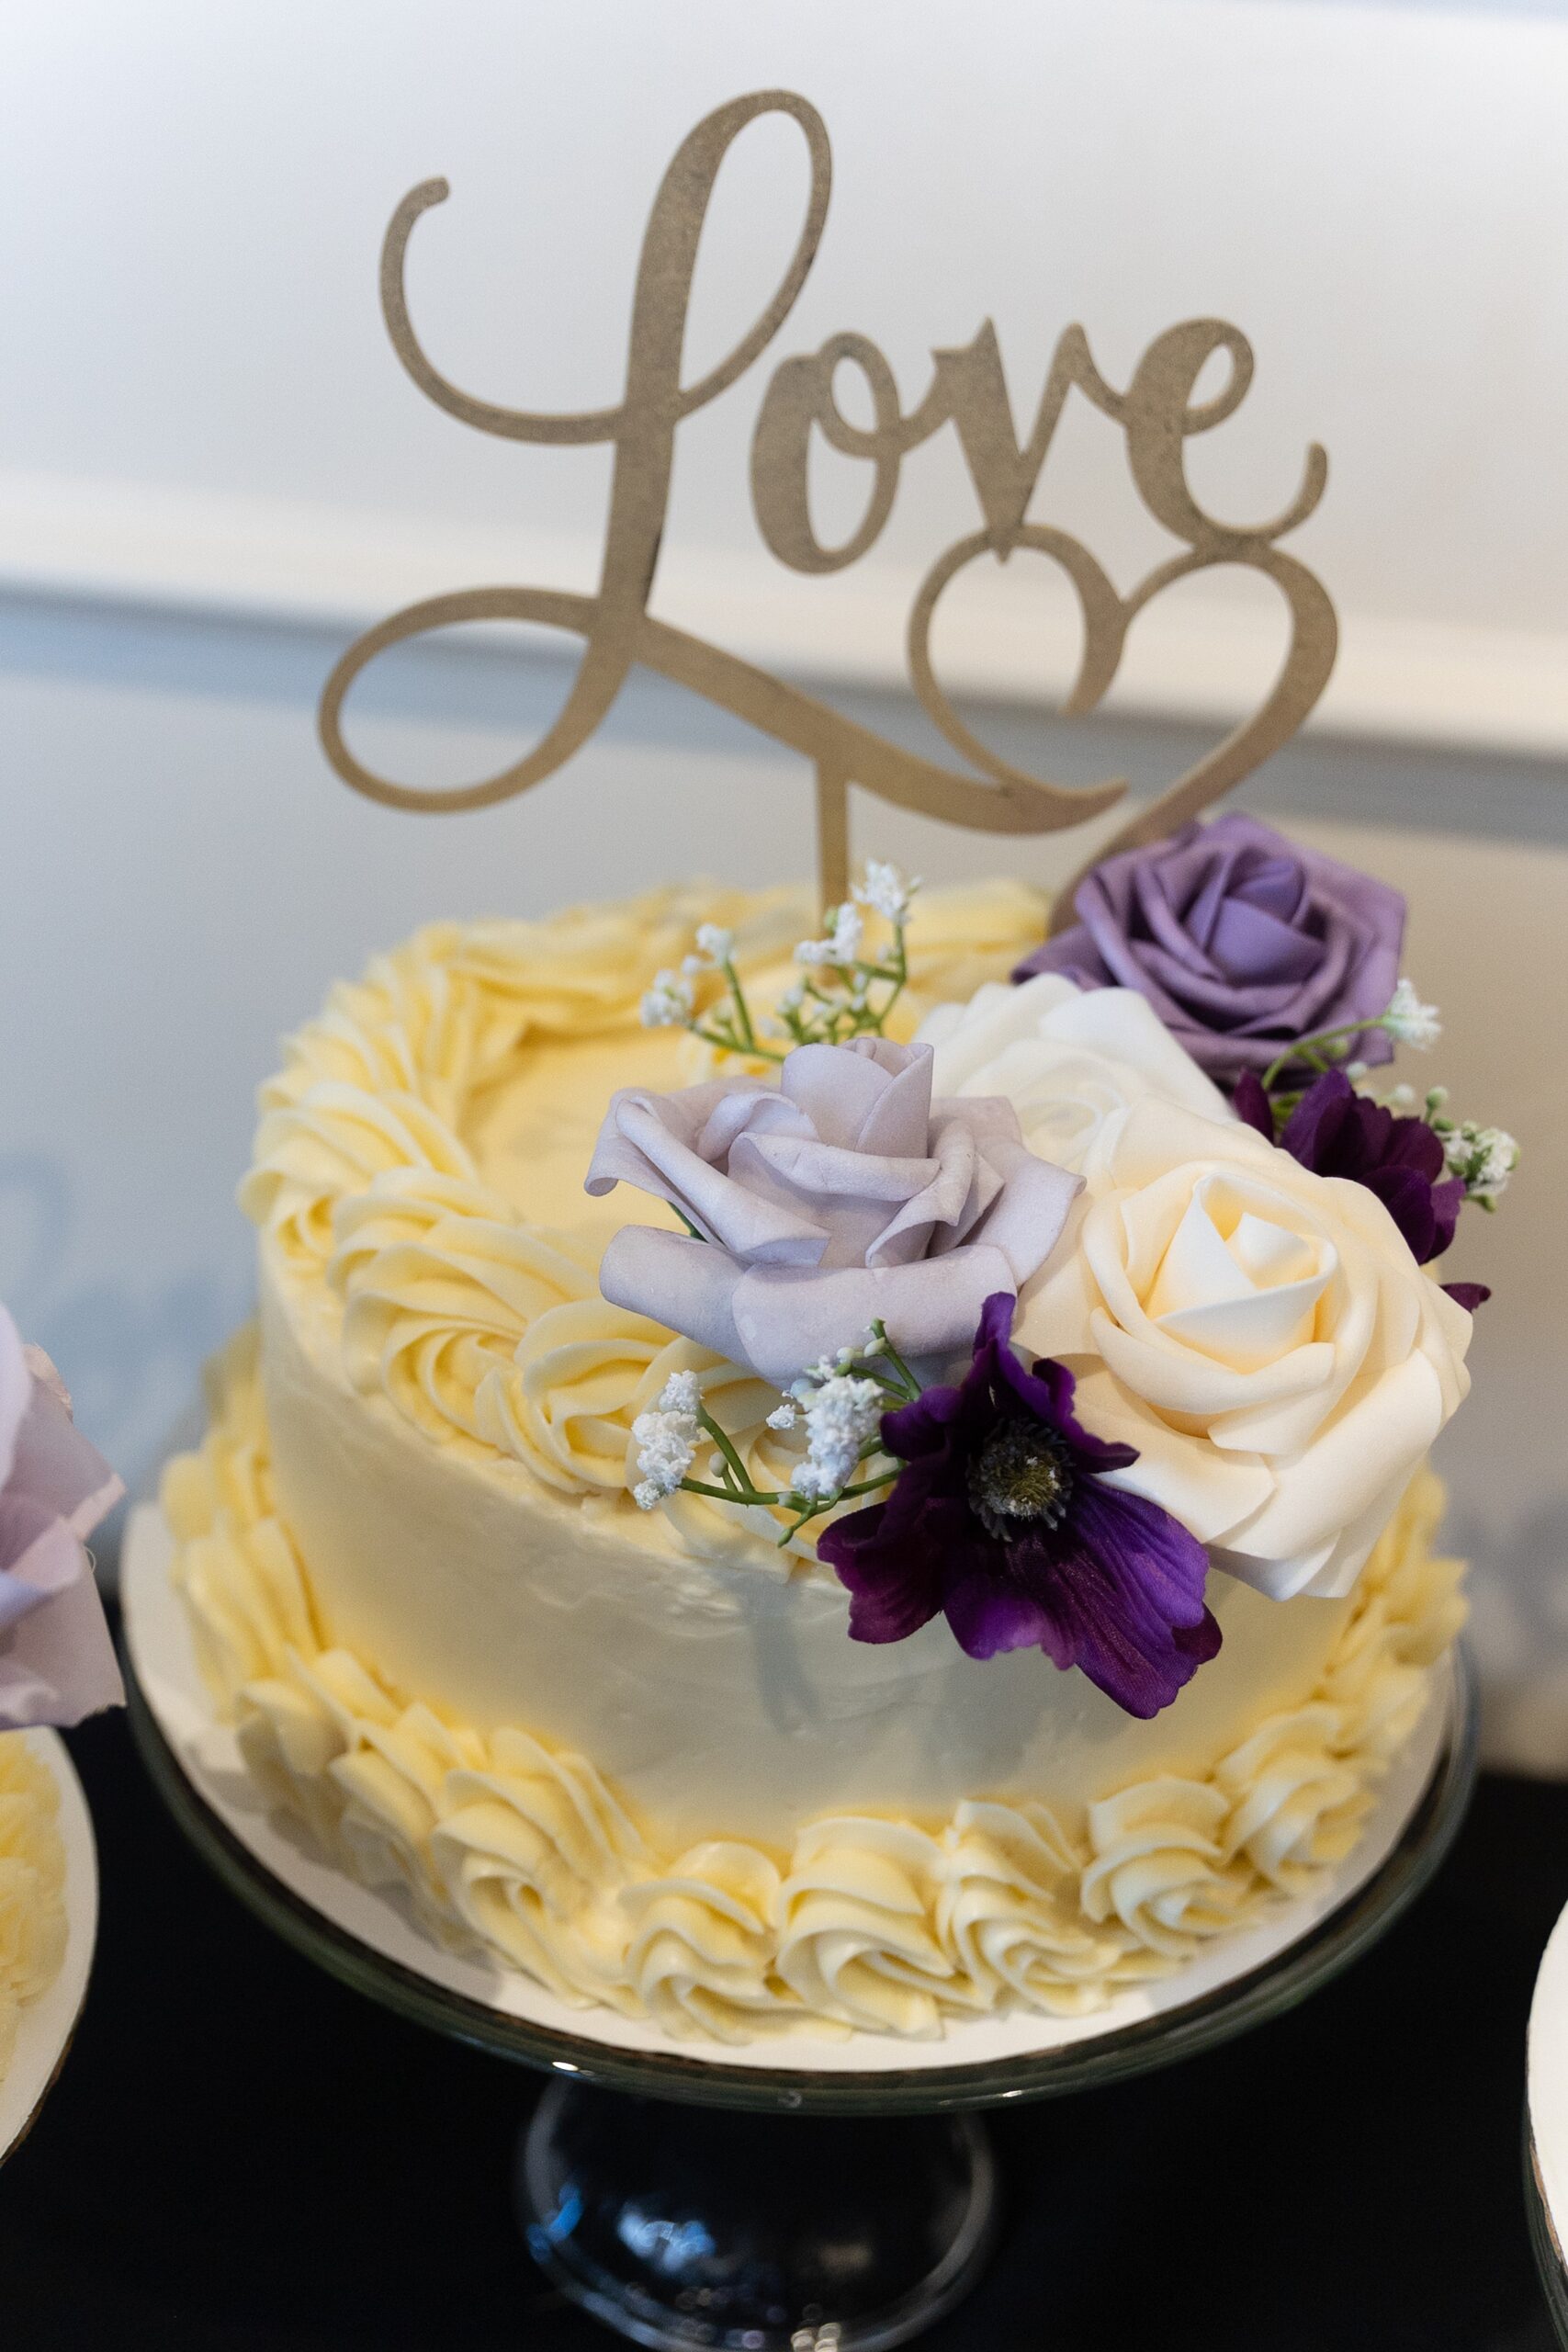 Details of a yellow wedding cake with a large floral decoration